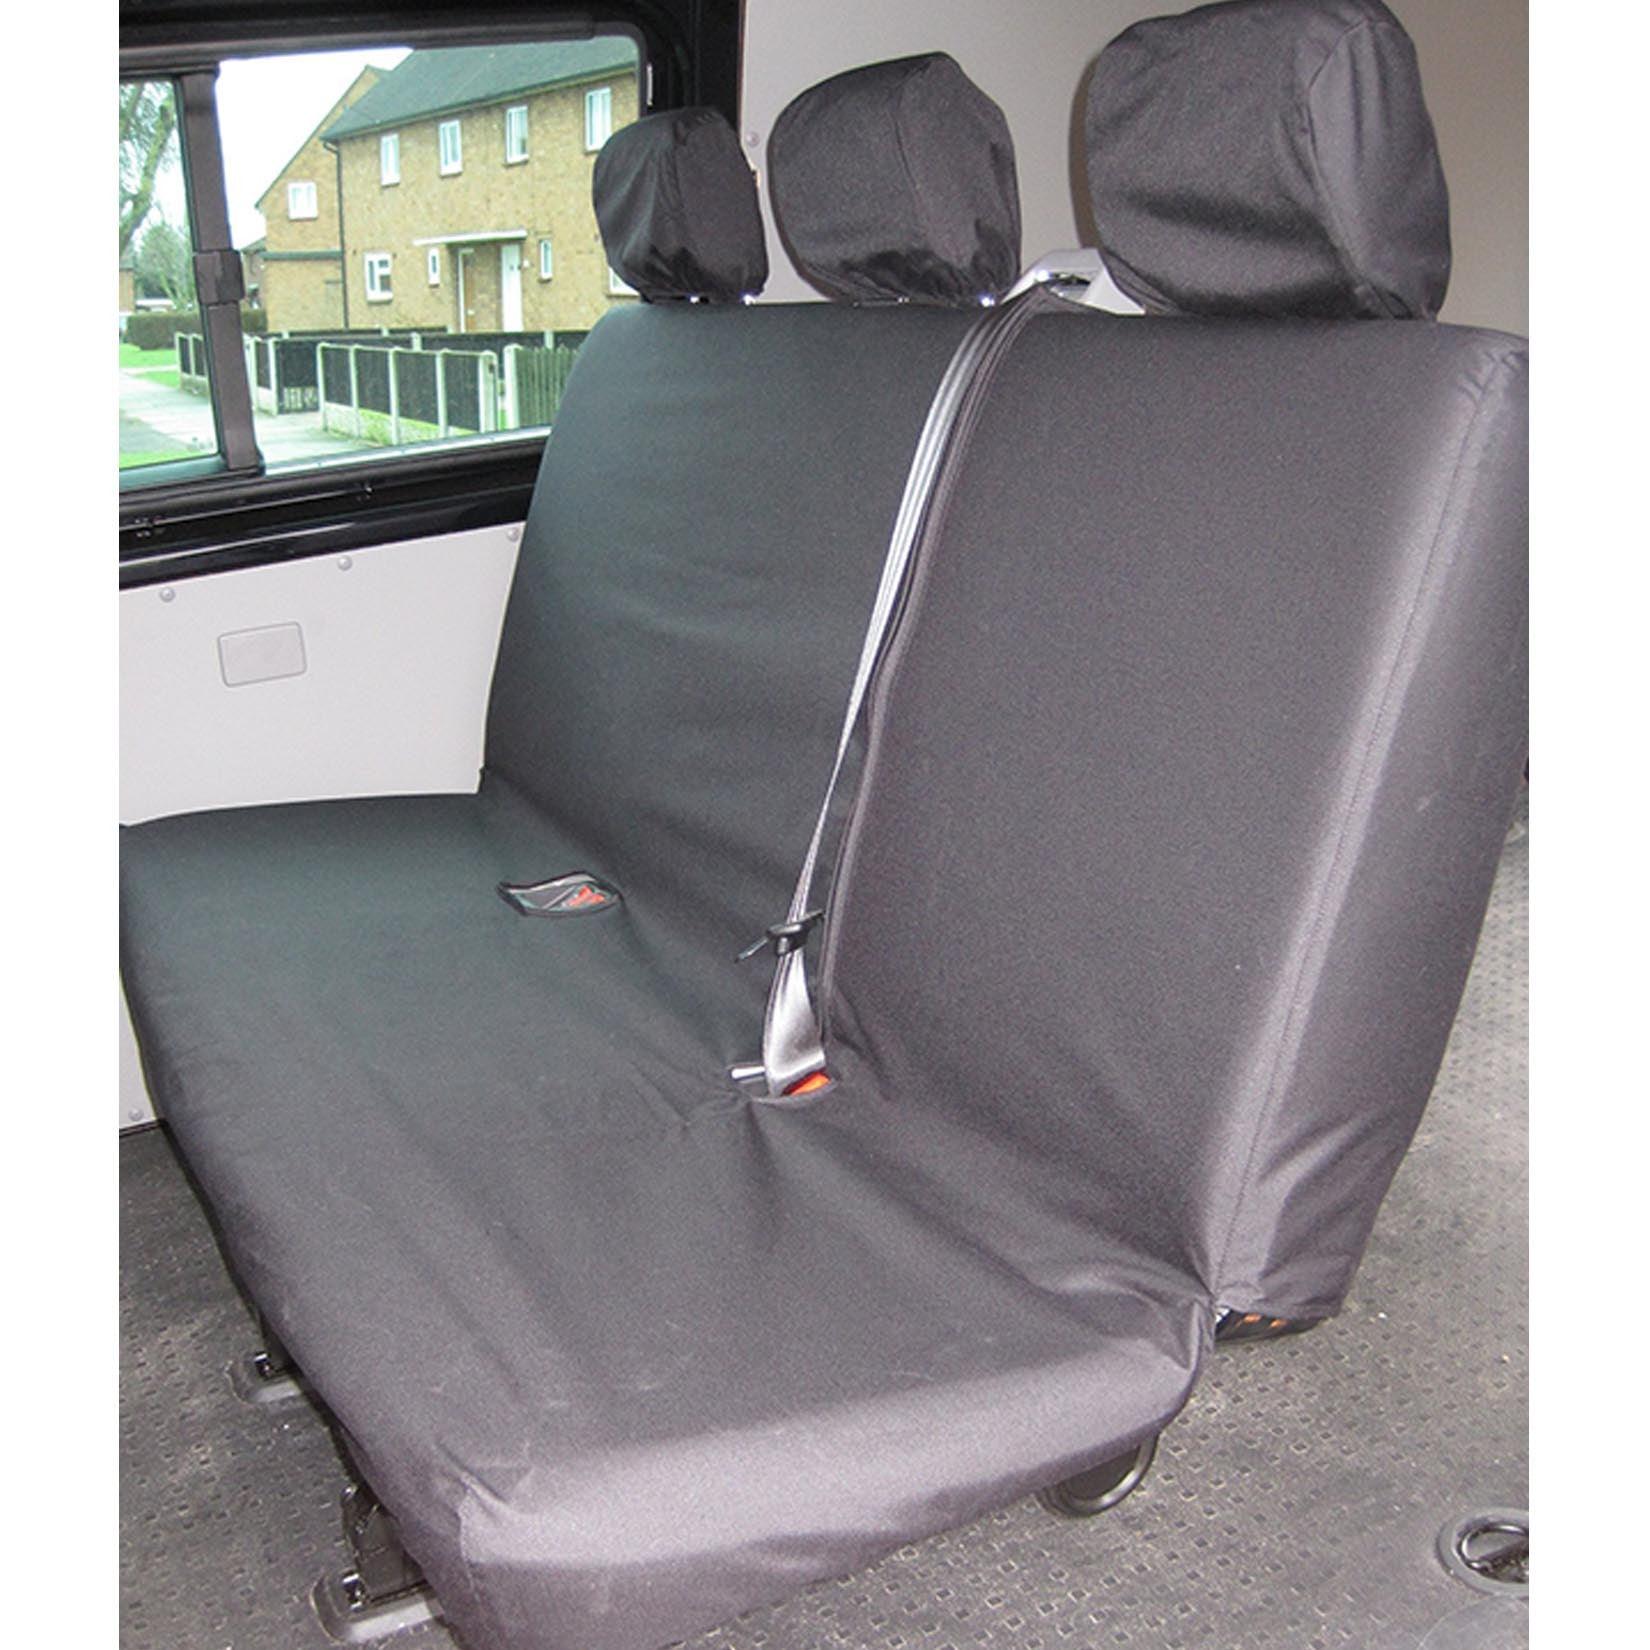 VW TRANSPORTER T5 T6 2010 ON REAR 3-SEATER BENCH PASSENGER SEAT COVERS – BLACK - Storm Xccessories2